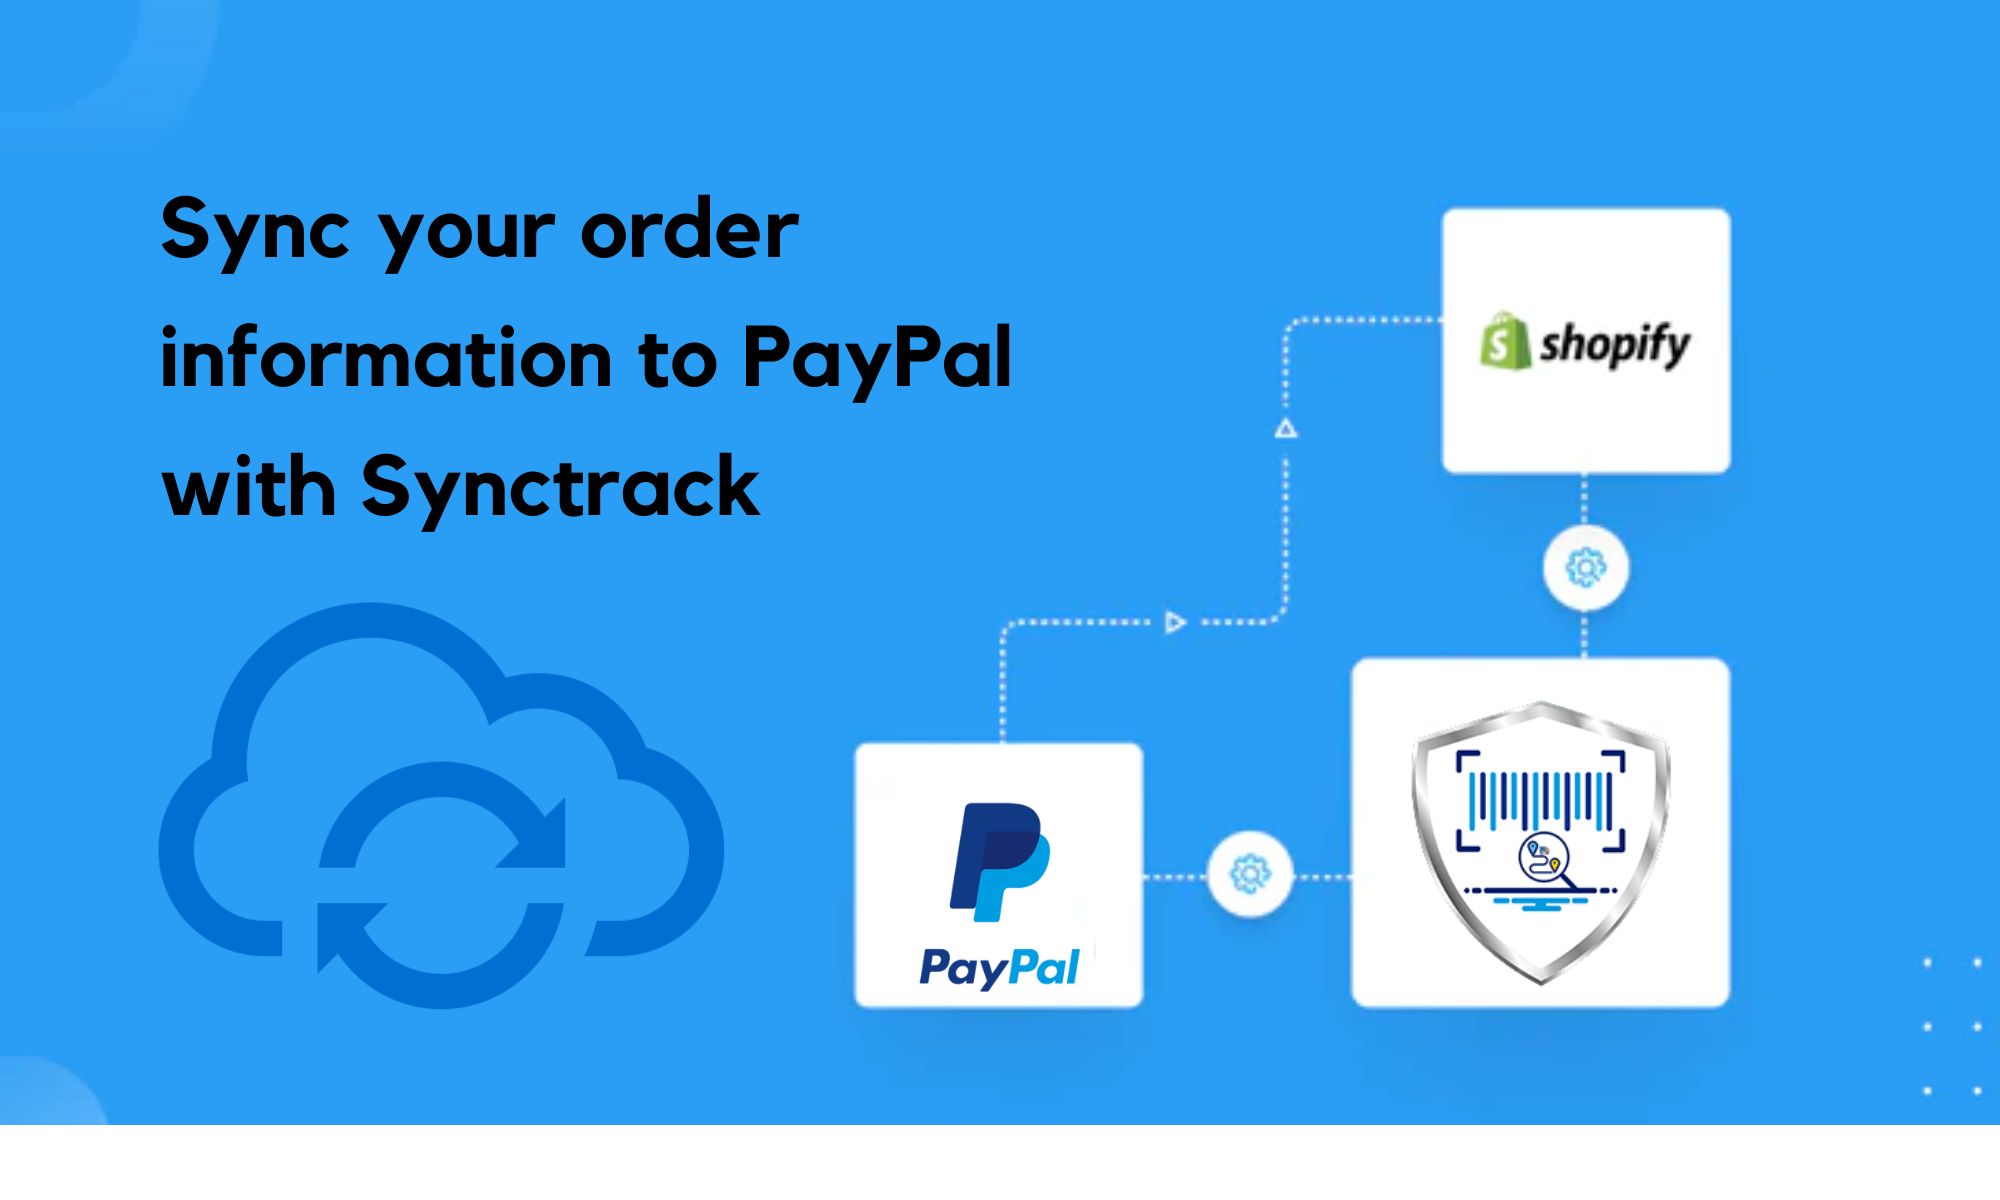 Sync your order information to PayPal with Synctrack